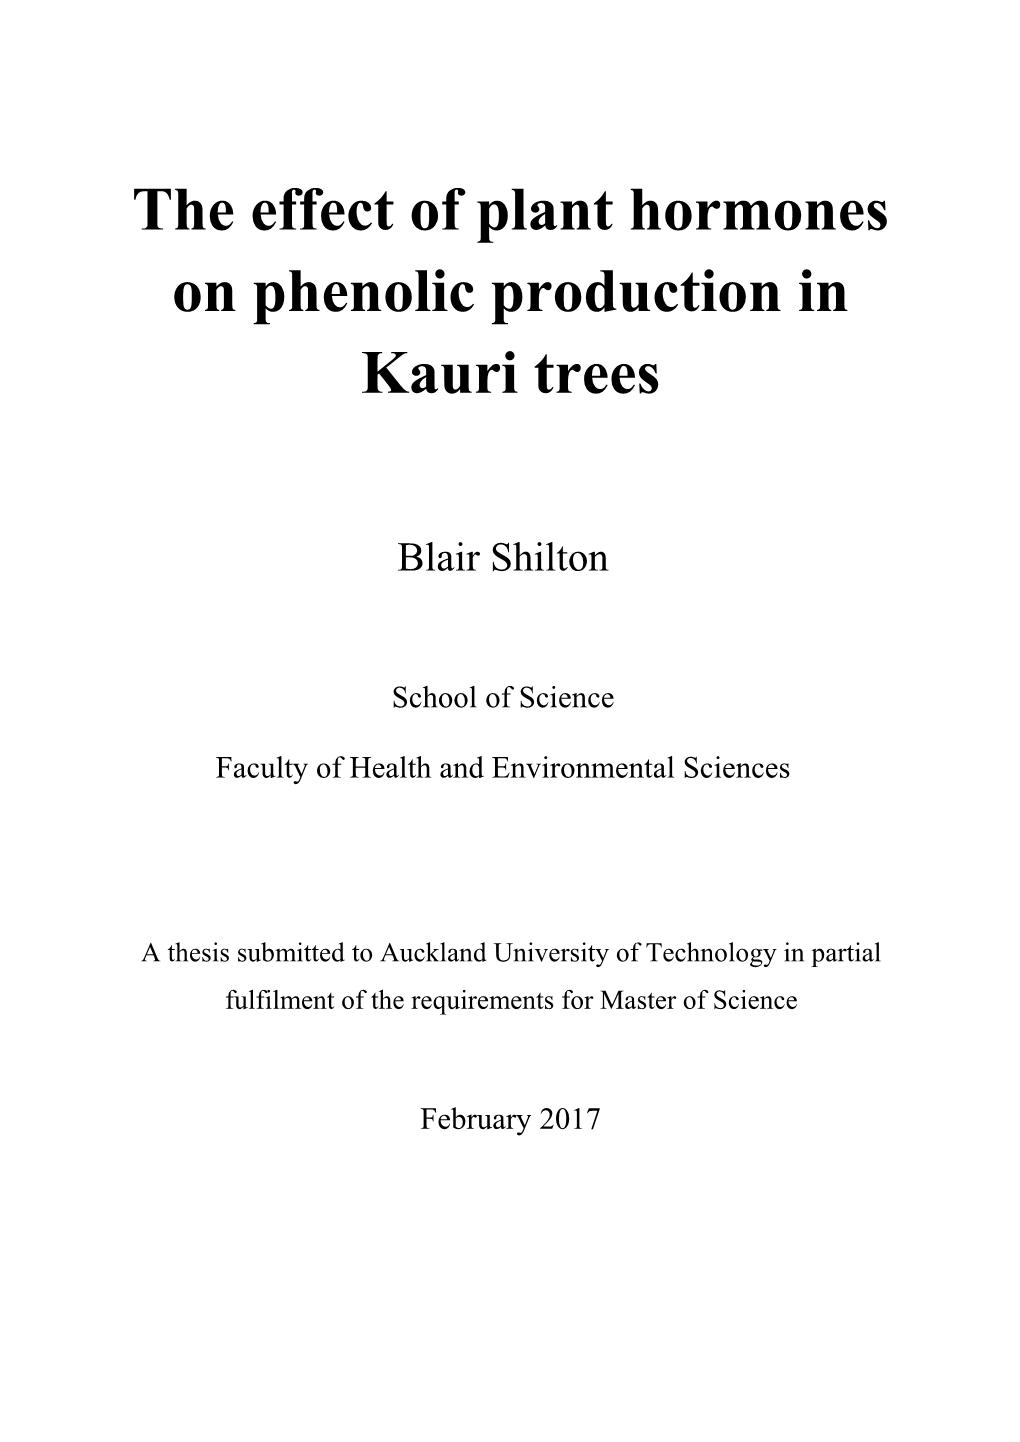 The Effect of Plant Hormones on Phenolic Production in Kauri Trees